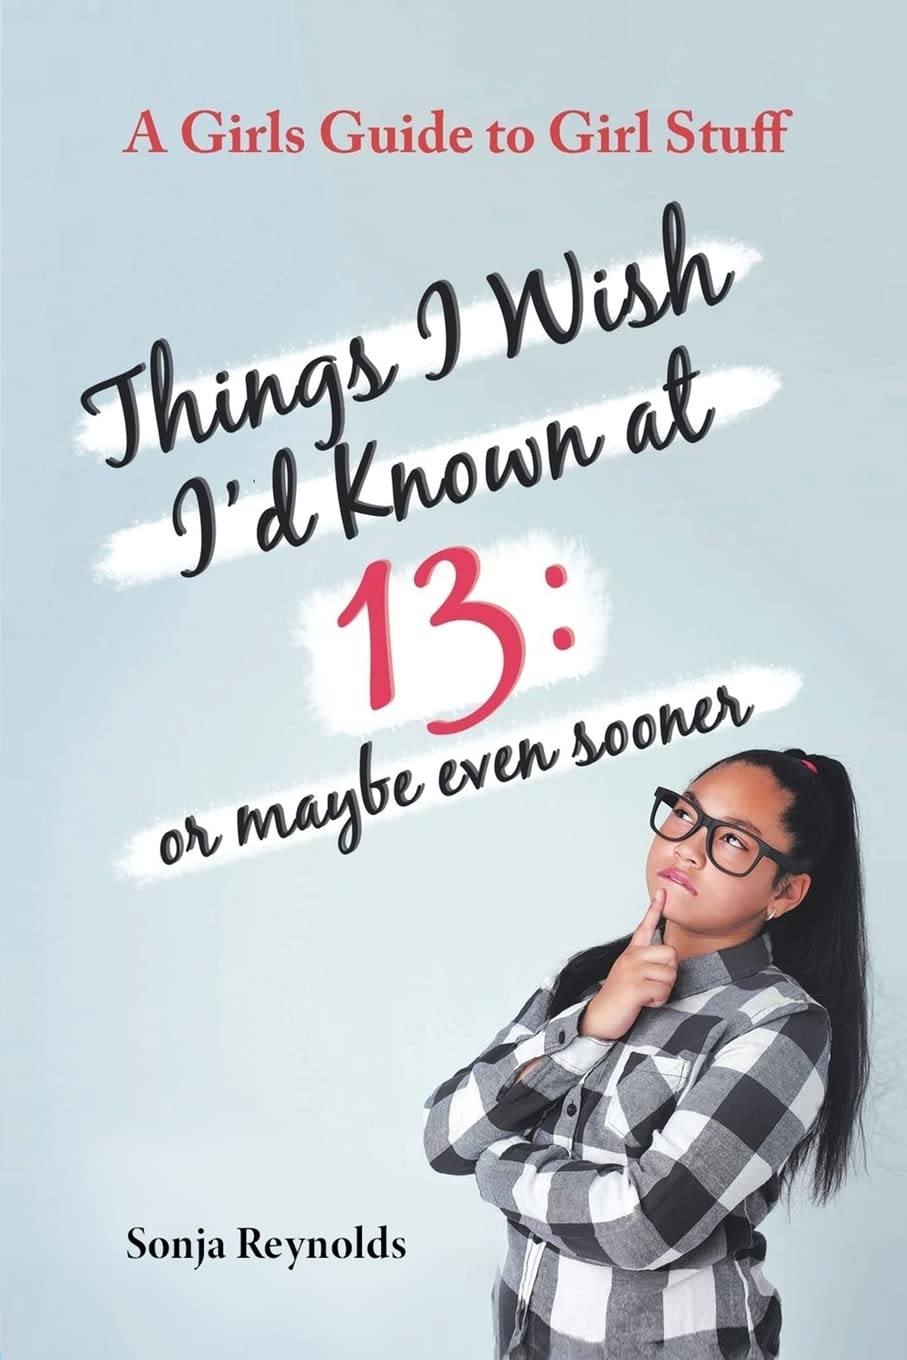 Sonja Reynolds promotes her book, Things I Wish I'd Known at 13: Or Maybe Even Sooner, an Educative Piece for Girls